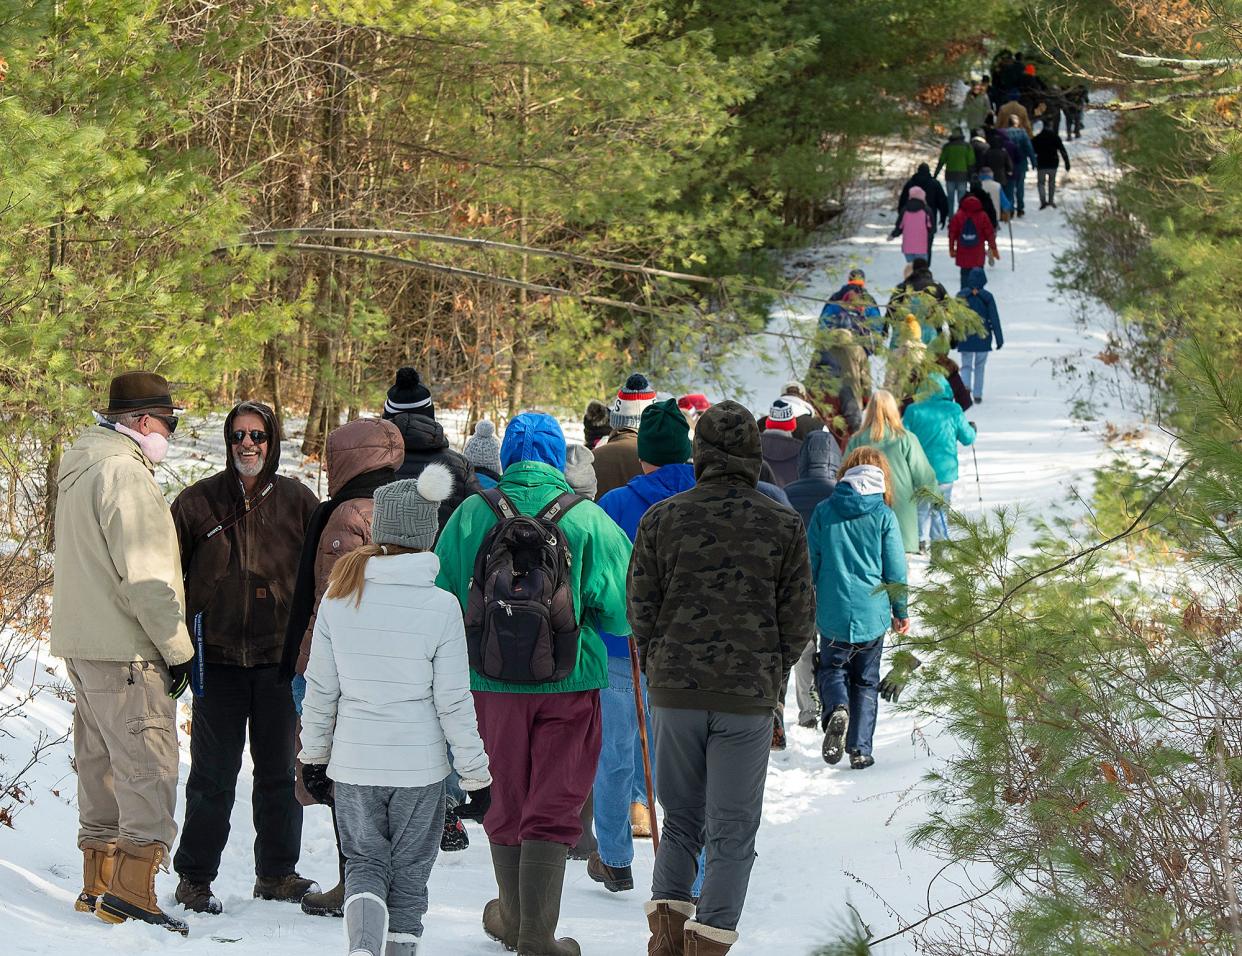 DCR watershed rangers lead about 100 people to a spot on the Wachusett Reservoir in West Boylston during the annual First Day Hike Wednesday, Jan. 1, 2020.